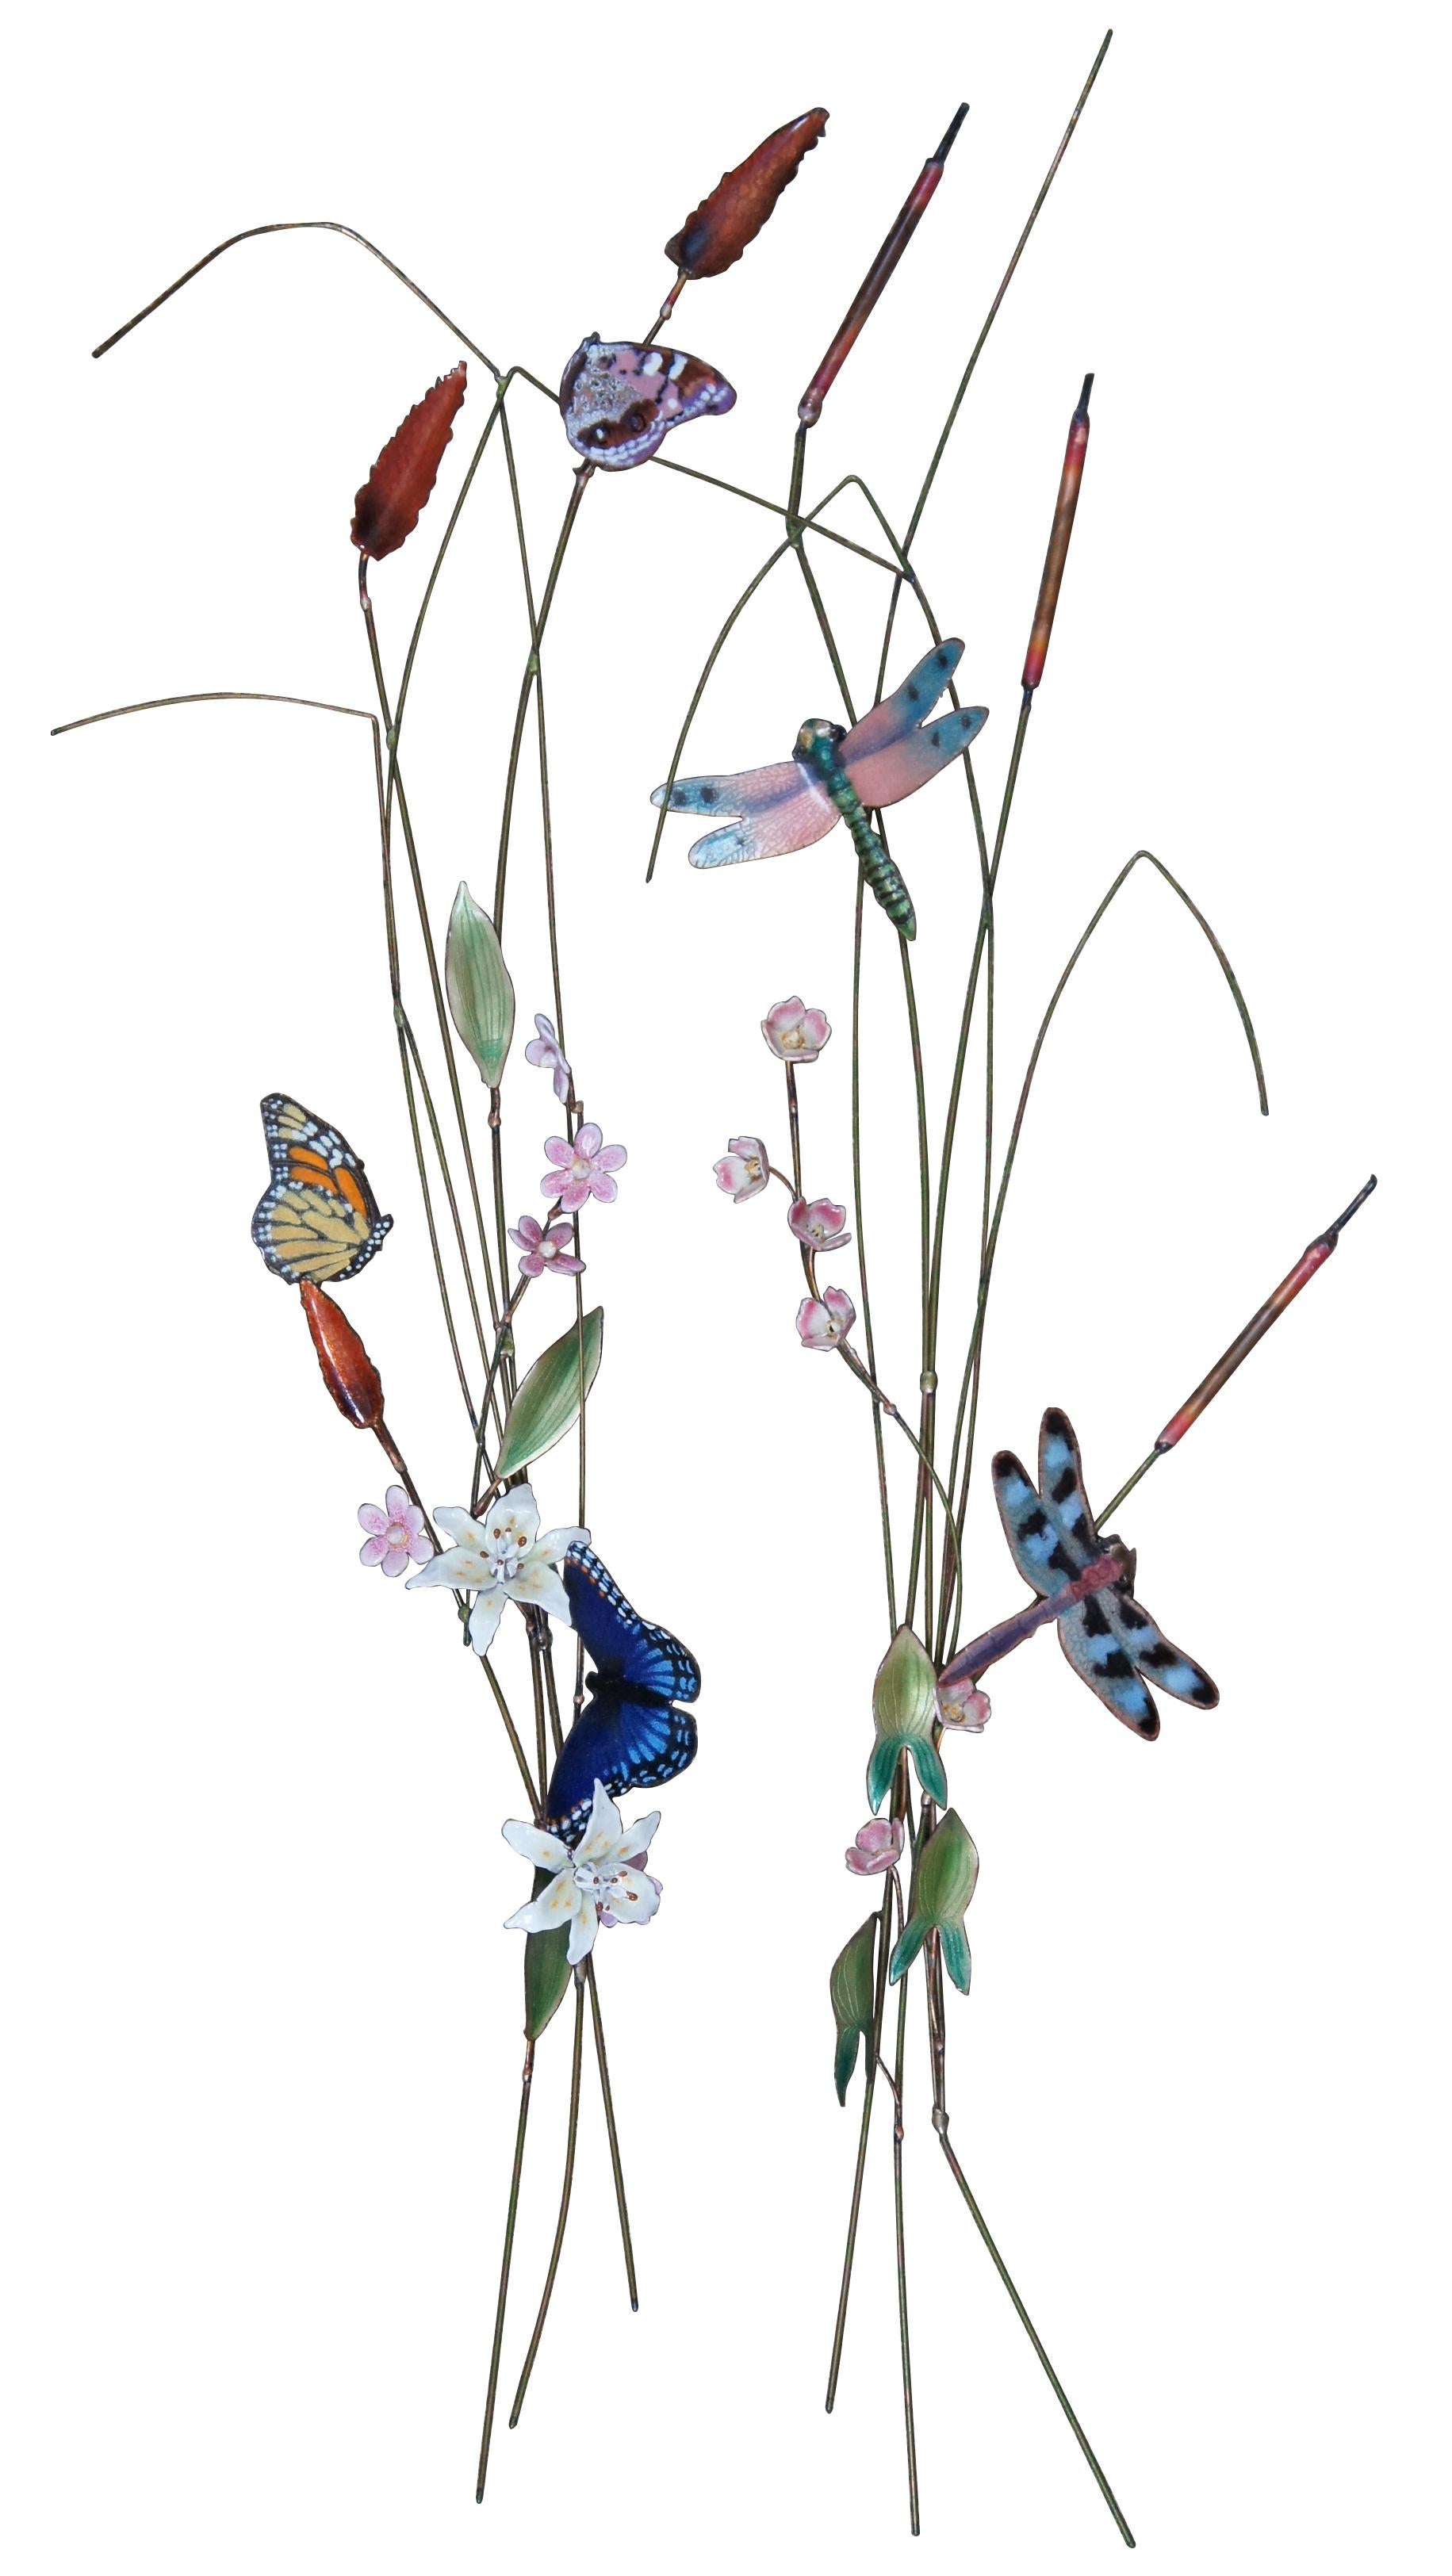 Magenta Butterfly on Lily Metal Wall Art Sculpture by Bovano of Cheshire #B55 